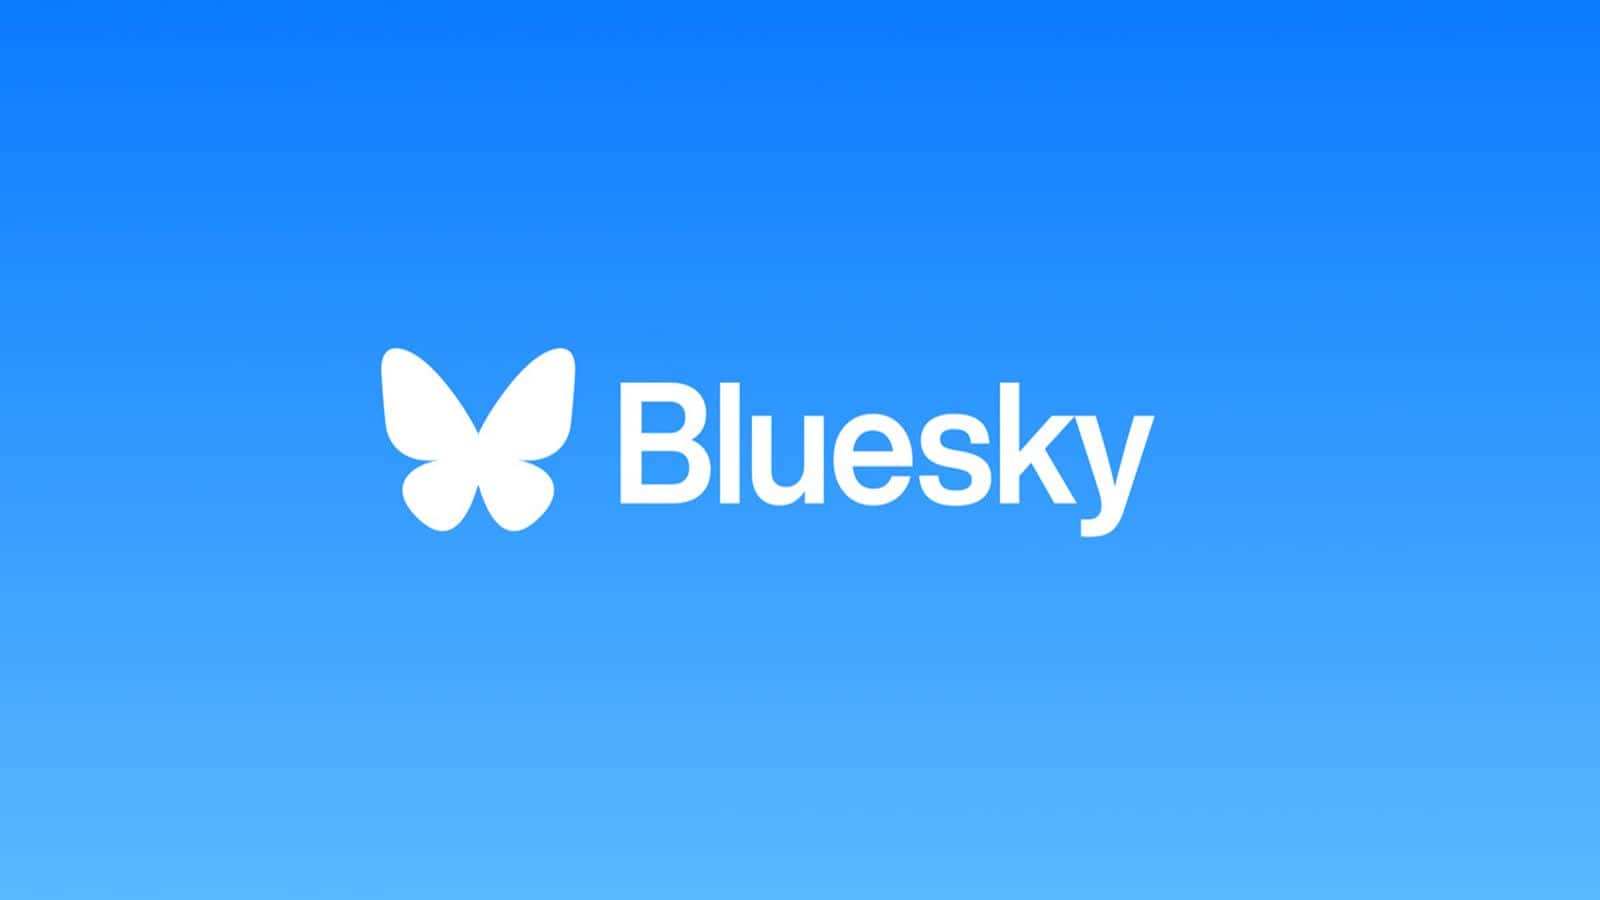 Bluesky reverses usage policy to welcome heads of state